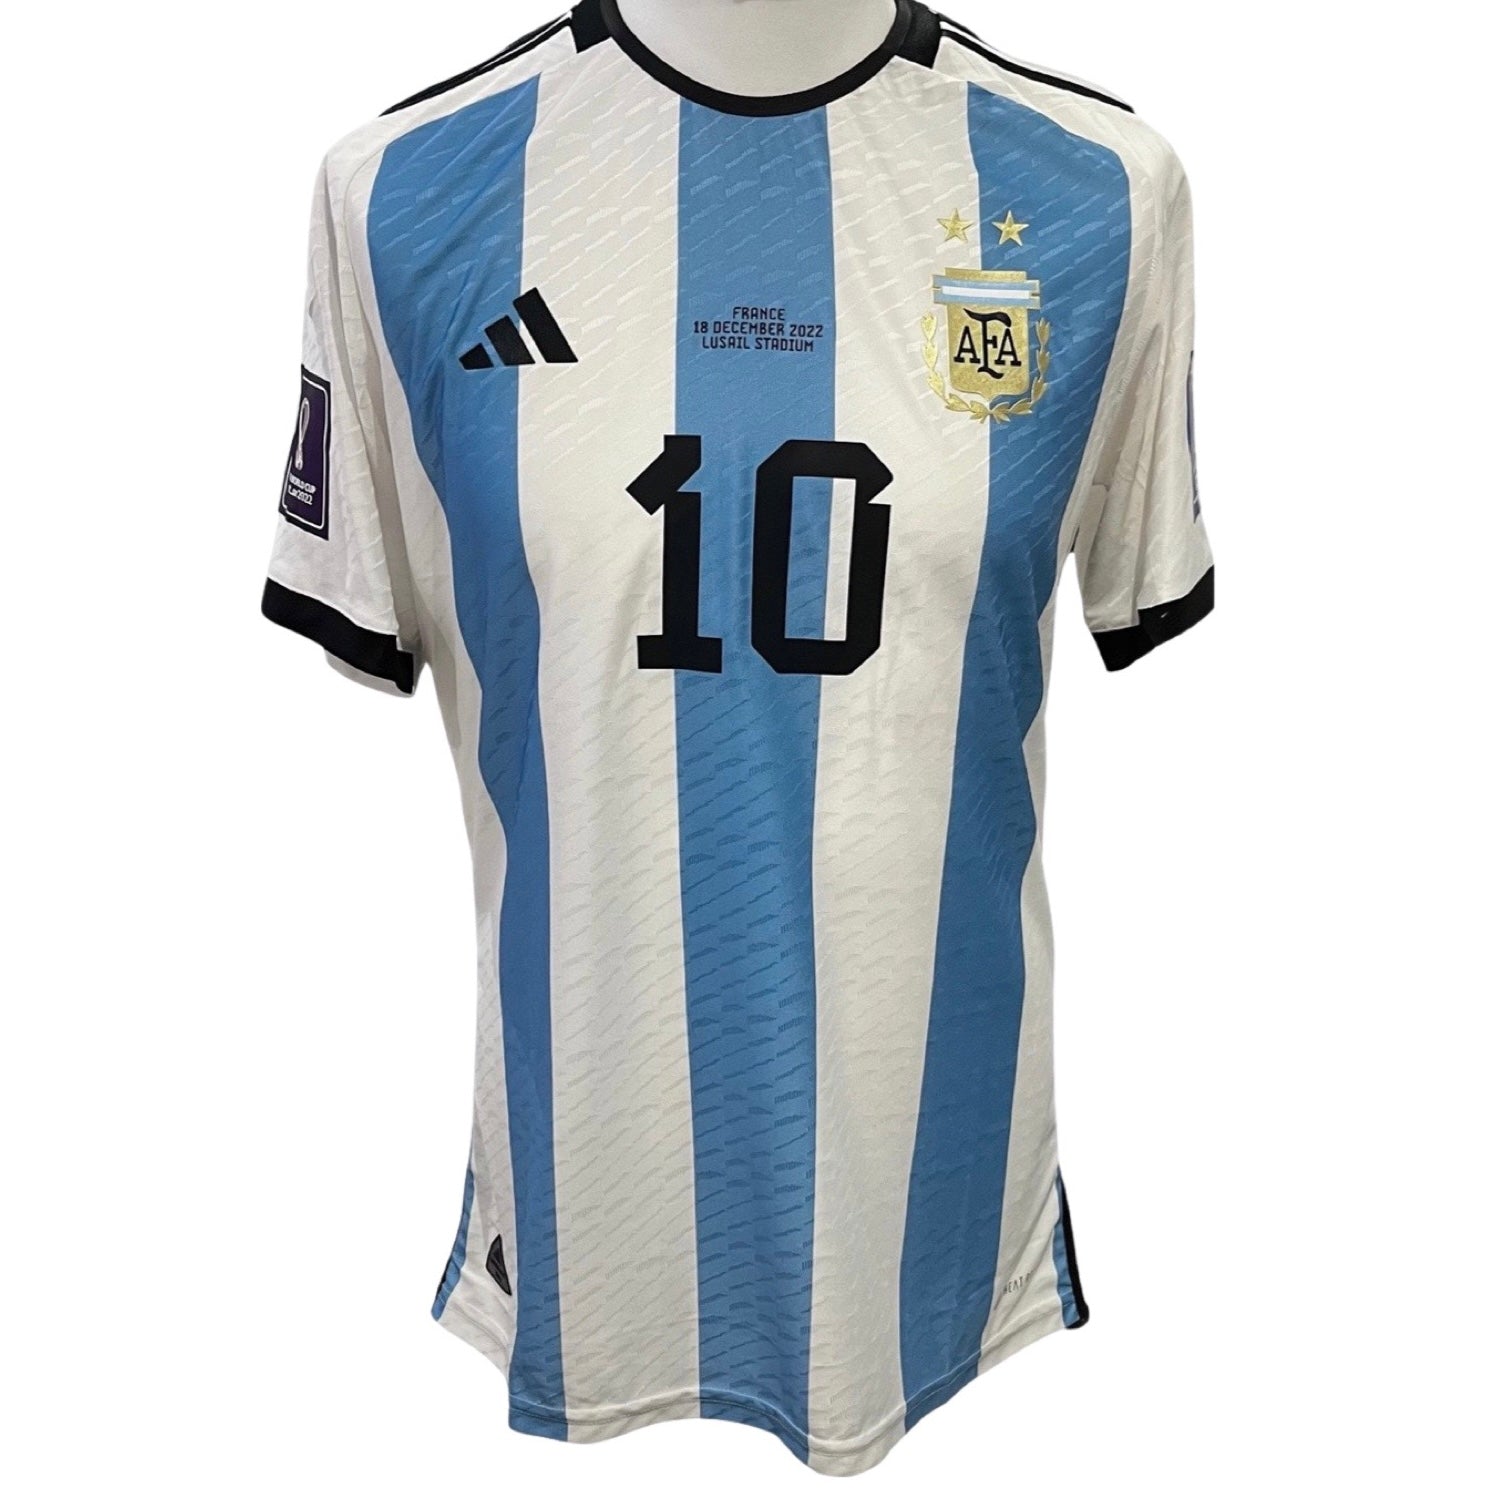 messi jersey 2022 world cup